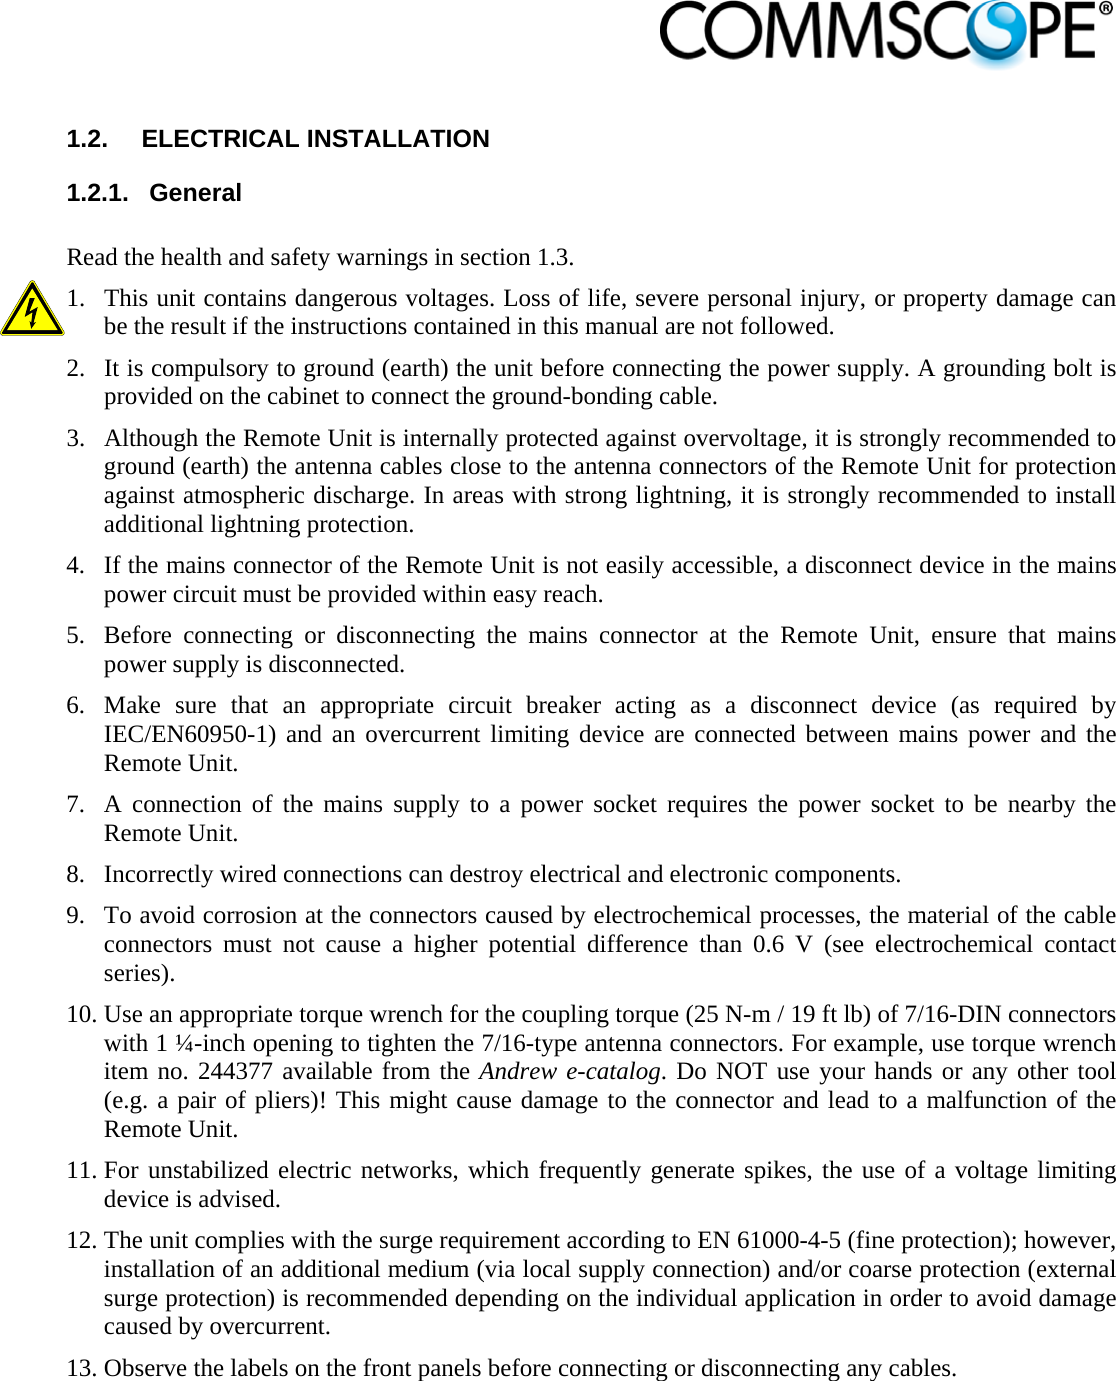                             1.2.  ELECTRICAL INSTALLATION 1.2.1.  General  Read the health and safety warnings in section 1.3.  1. This unit contains dangerous voltages. Loss of life, severe personal injury, or property damage can be the result if the instructions contained in this manual are not followed. 2. It is compulsory to ground (earth) the unit before connecting the power supply. A grounding bolt is provided on the cabinet to connect the ground-bonding cable. 3. Although the Remote Unit is internally protected against overvoltage, it is strongly recommended to ground (earth) the antenna cables close to the antenna connectors of the Remote Unit for protection against atmospheric discharge. In areas with strong lightning, it is strongly recommended to install additional lightning protection. 4. If the mains connector of the Remote Unit is not easily accessible, a disconnect device in the mains power circuit must be provided within easy reach. 5. Before connecting or disconnecting the mains connector at the Remote Unit, ensure that mains power supply is disconnected.  6. Make sure that an appropriate circuit breaker acting as a disconnect device (as required by IEC/EN60950-1) and an overcurrent limiting device are connected between mains power and the Remote Unit. 7. A connection of the mains supply to a power socket requires the power socket to be nearby the Remote Unit. 8. Incorrectly wired connections can destroy electrical and electronic components. 9. To avoid corrosion at the connectors caused by electrochemical processes, the material of the cable connectors must not cause a higher potential difference than 0.6 V (see electrochemical contact series). 10. Use an appropriate torque wrench for the coupling torque (25 N-m / 19 ft lb) of 7/16-DIN connectors with 1 ¼-inch opening to tighten the 7/16-type antenna connectors. For example, use torque wrench item no. 244377 available from the Andrew e-catalog. Do NOT use your hands or any other tool (e.g. a pair of pliers)! This might cause damage to the connector and lead to a malfunction of the Remote Unit. 11. For unstabilized electric networks, which frequently generate spikes, the use of a voltage limiting device is advised.  12. The unit complies with the surge requirement according to EN 61000-4-5 (fine protection); however, installation of an additional medium (via local supply connection) and/or coarse protection (external surge protection) is recommended depending on the individual application in order to avoid damage caused by overcurrent. 13. Observe the labels on the front panels before connecting or disconnecting any cables. 